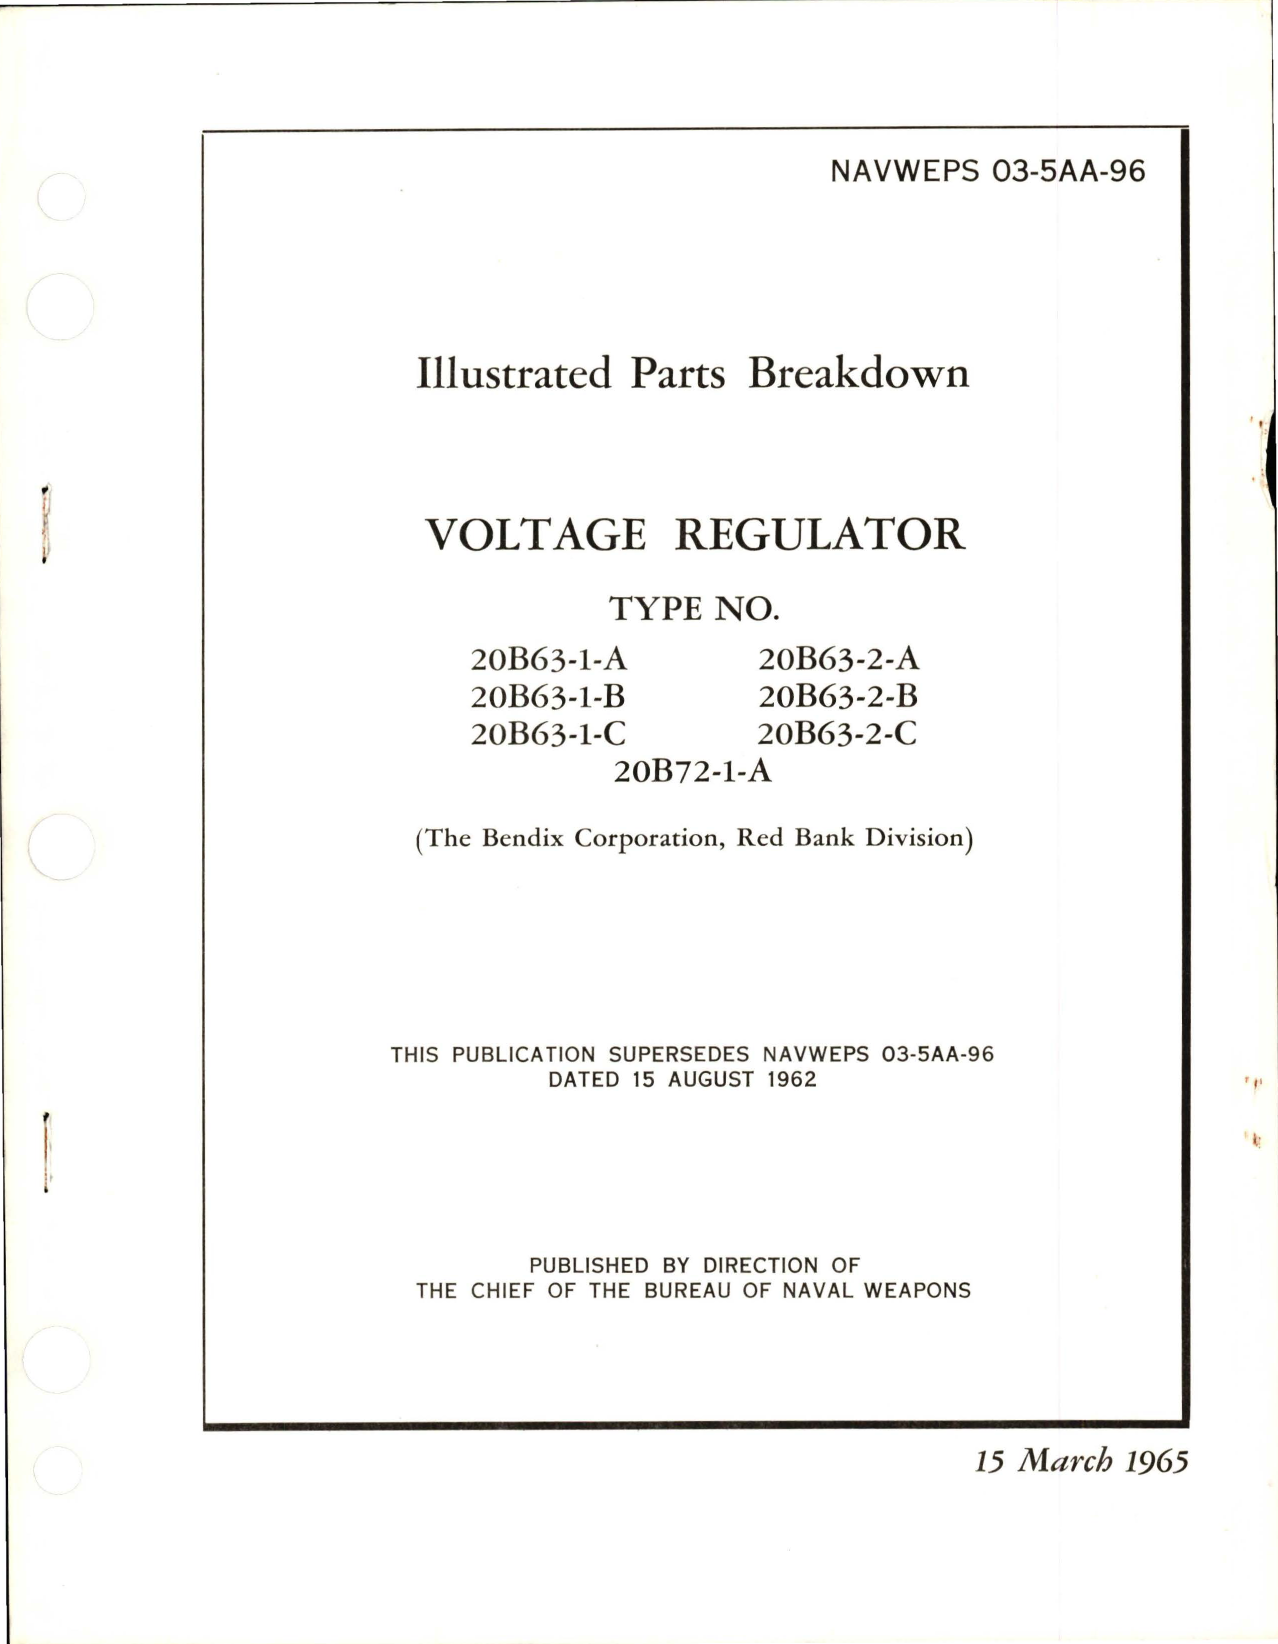 Sample page 1 from AirCorps Library document: Illustrated Parts Breakdown for Voltage Regulator 